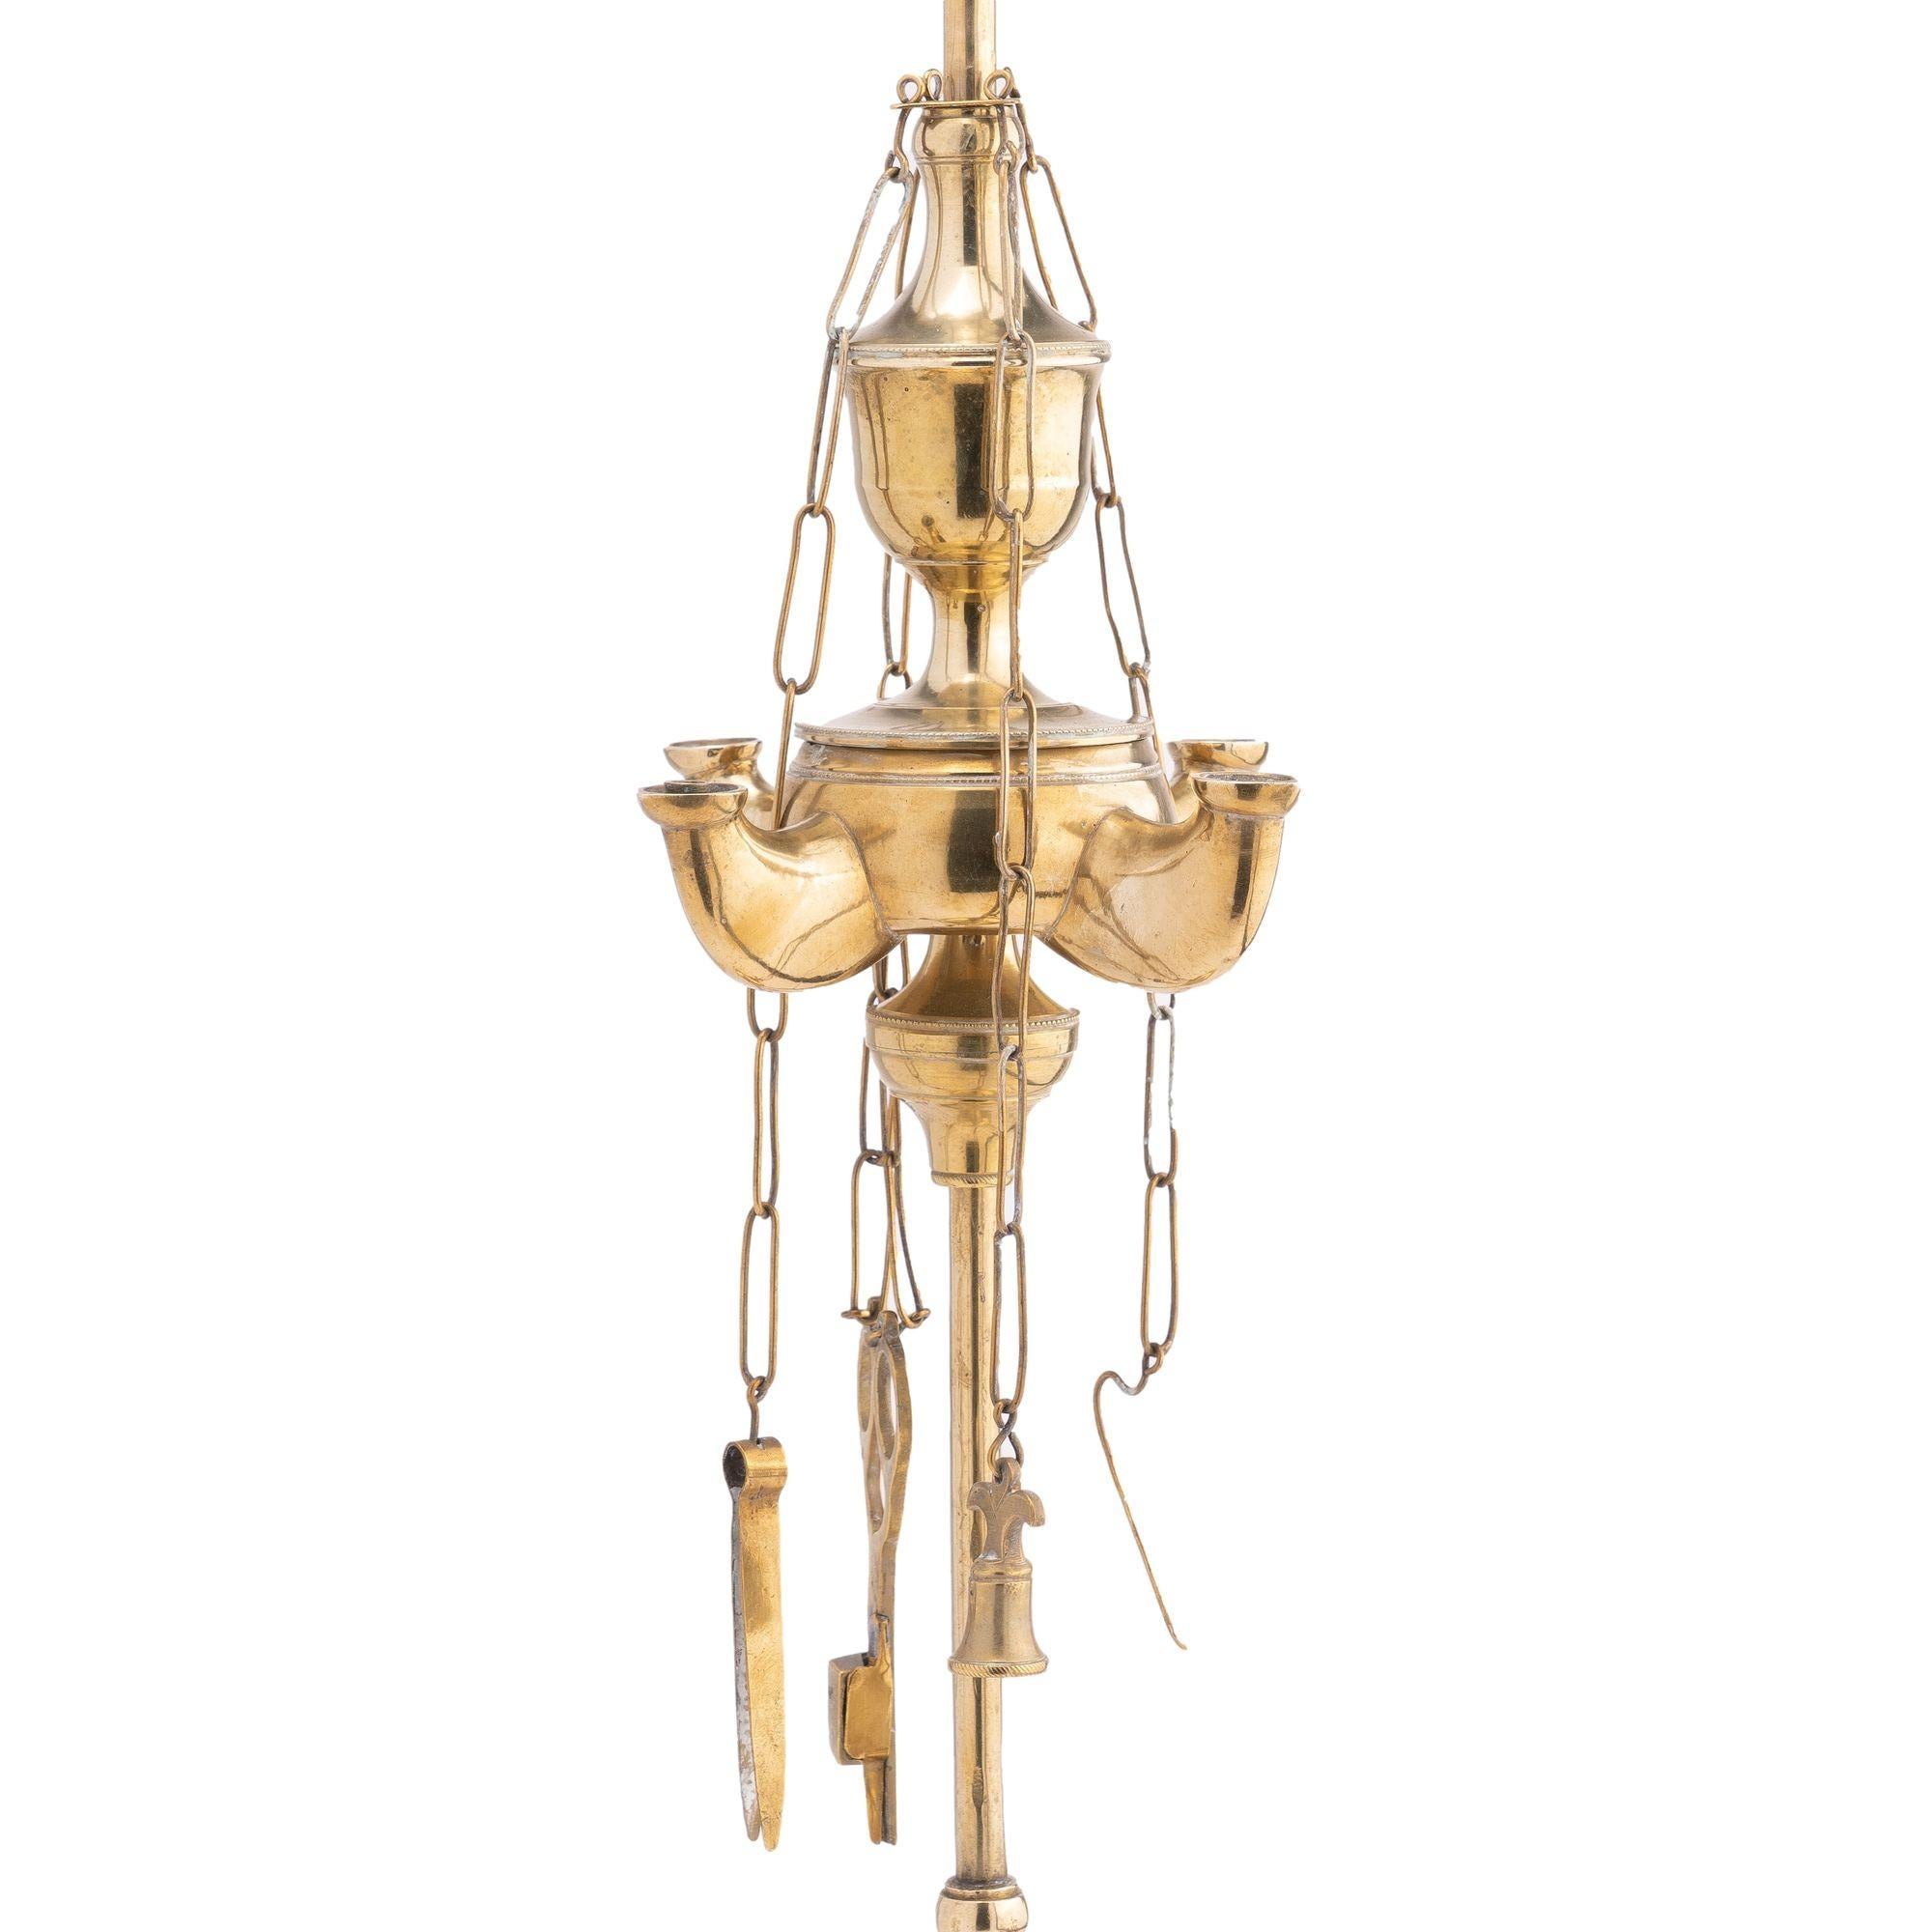 Cast brass four burner Lucerne oil lamp on a cast threaded rod. The rod is topped with an open shield form finial and is treaded to a conical centered circular base with standing rim, drip pan. The font is supported by an adjustable sliding knob and